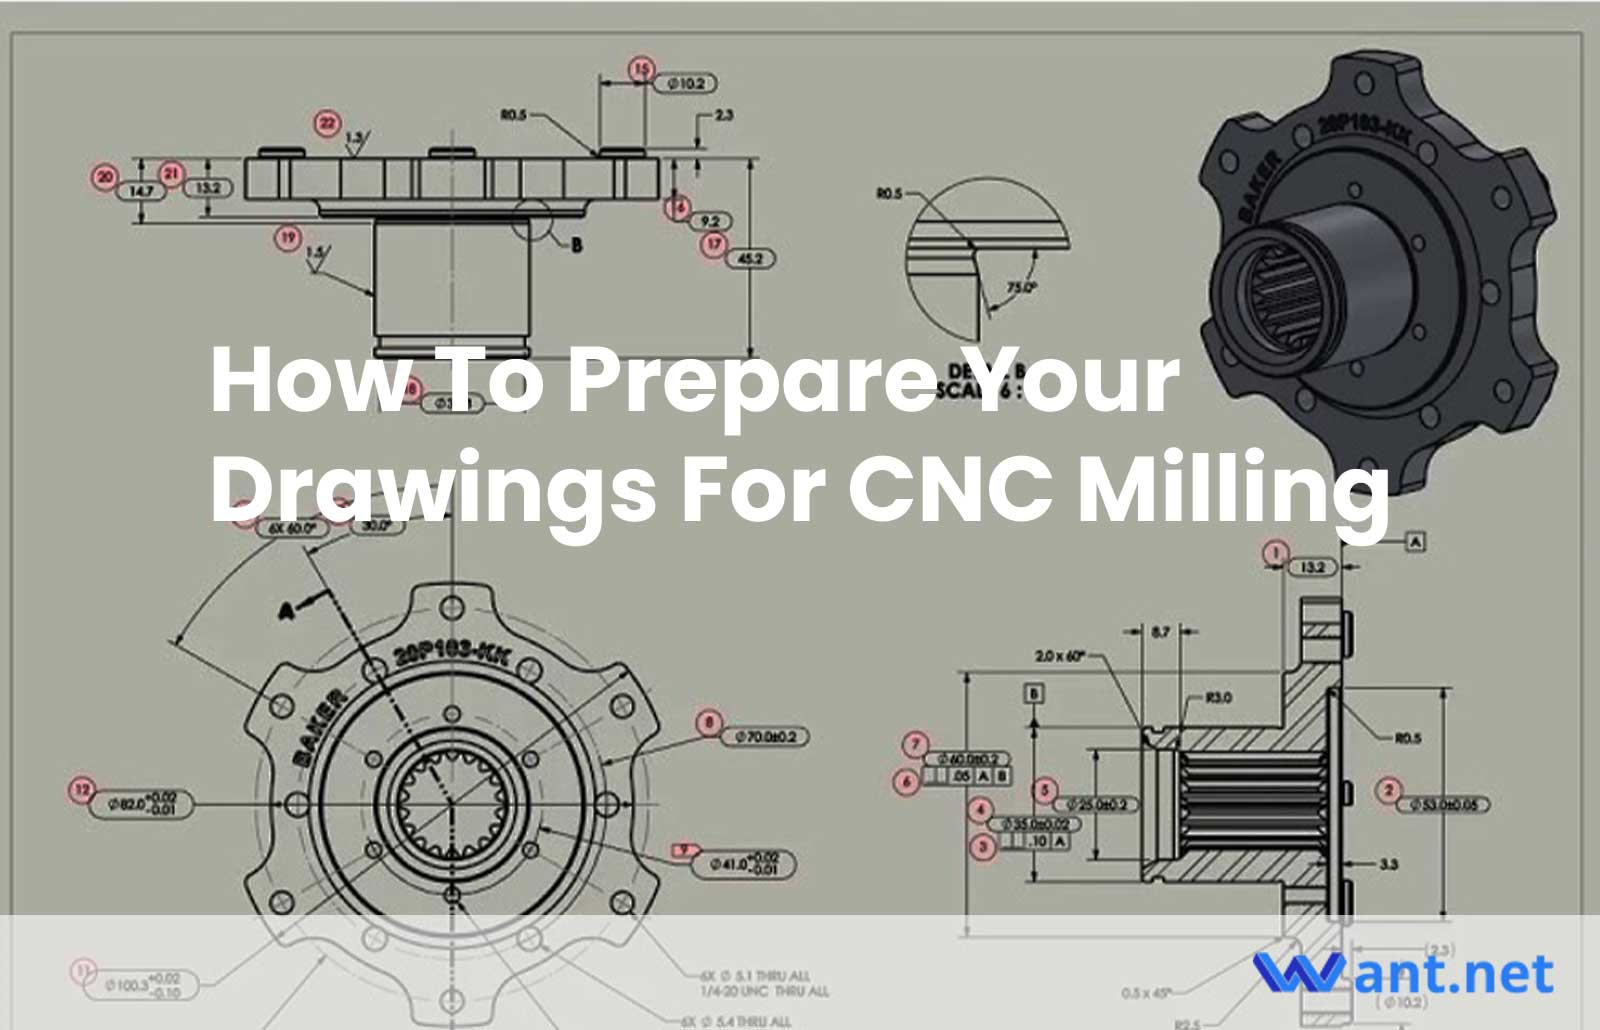 Drawings For CNC Milling